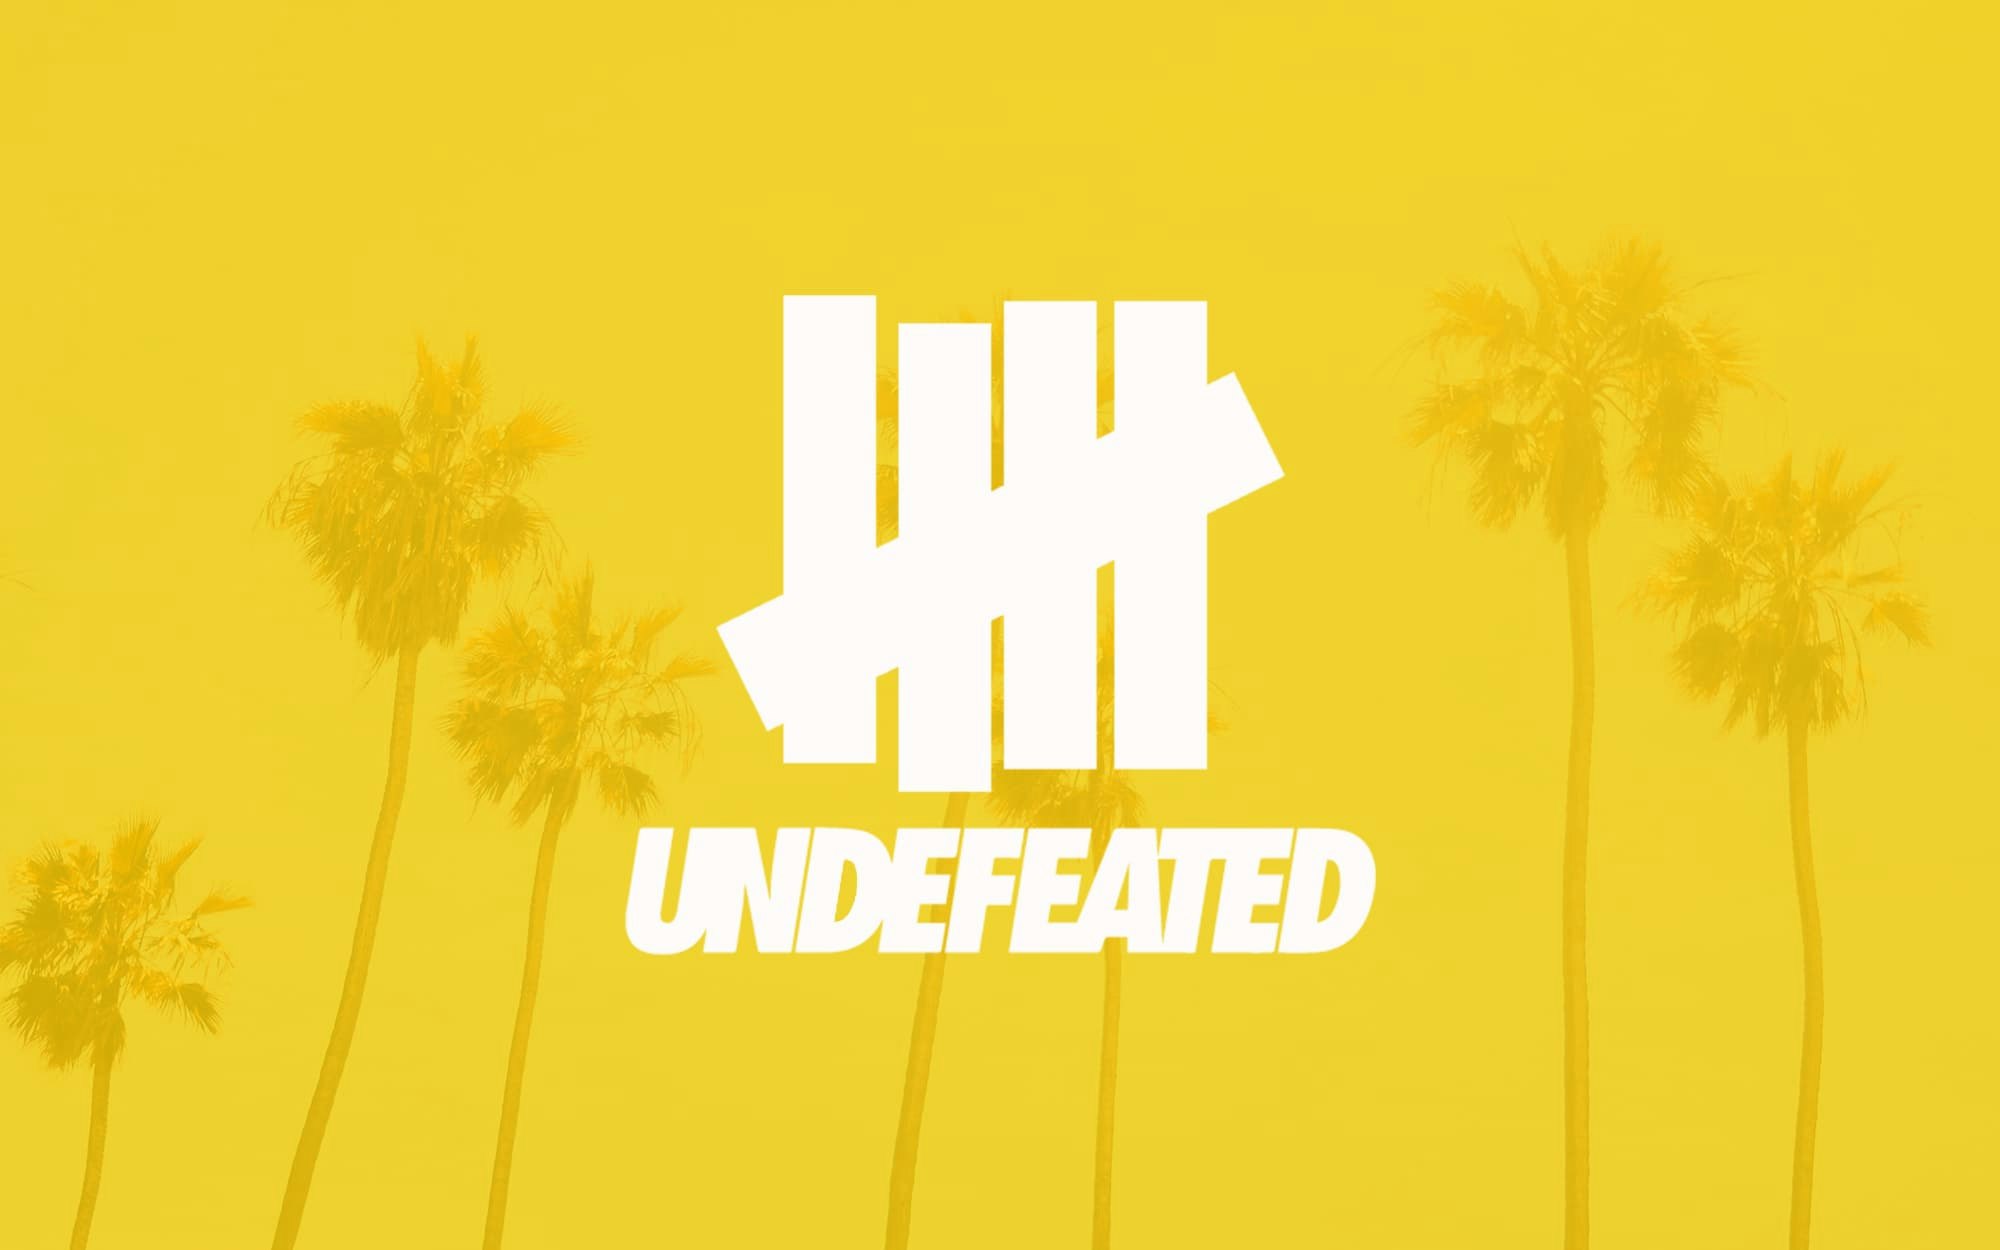 Undefeated